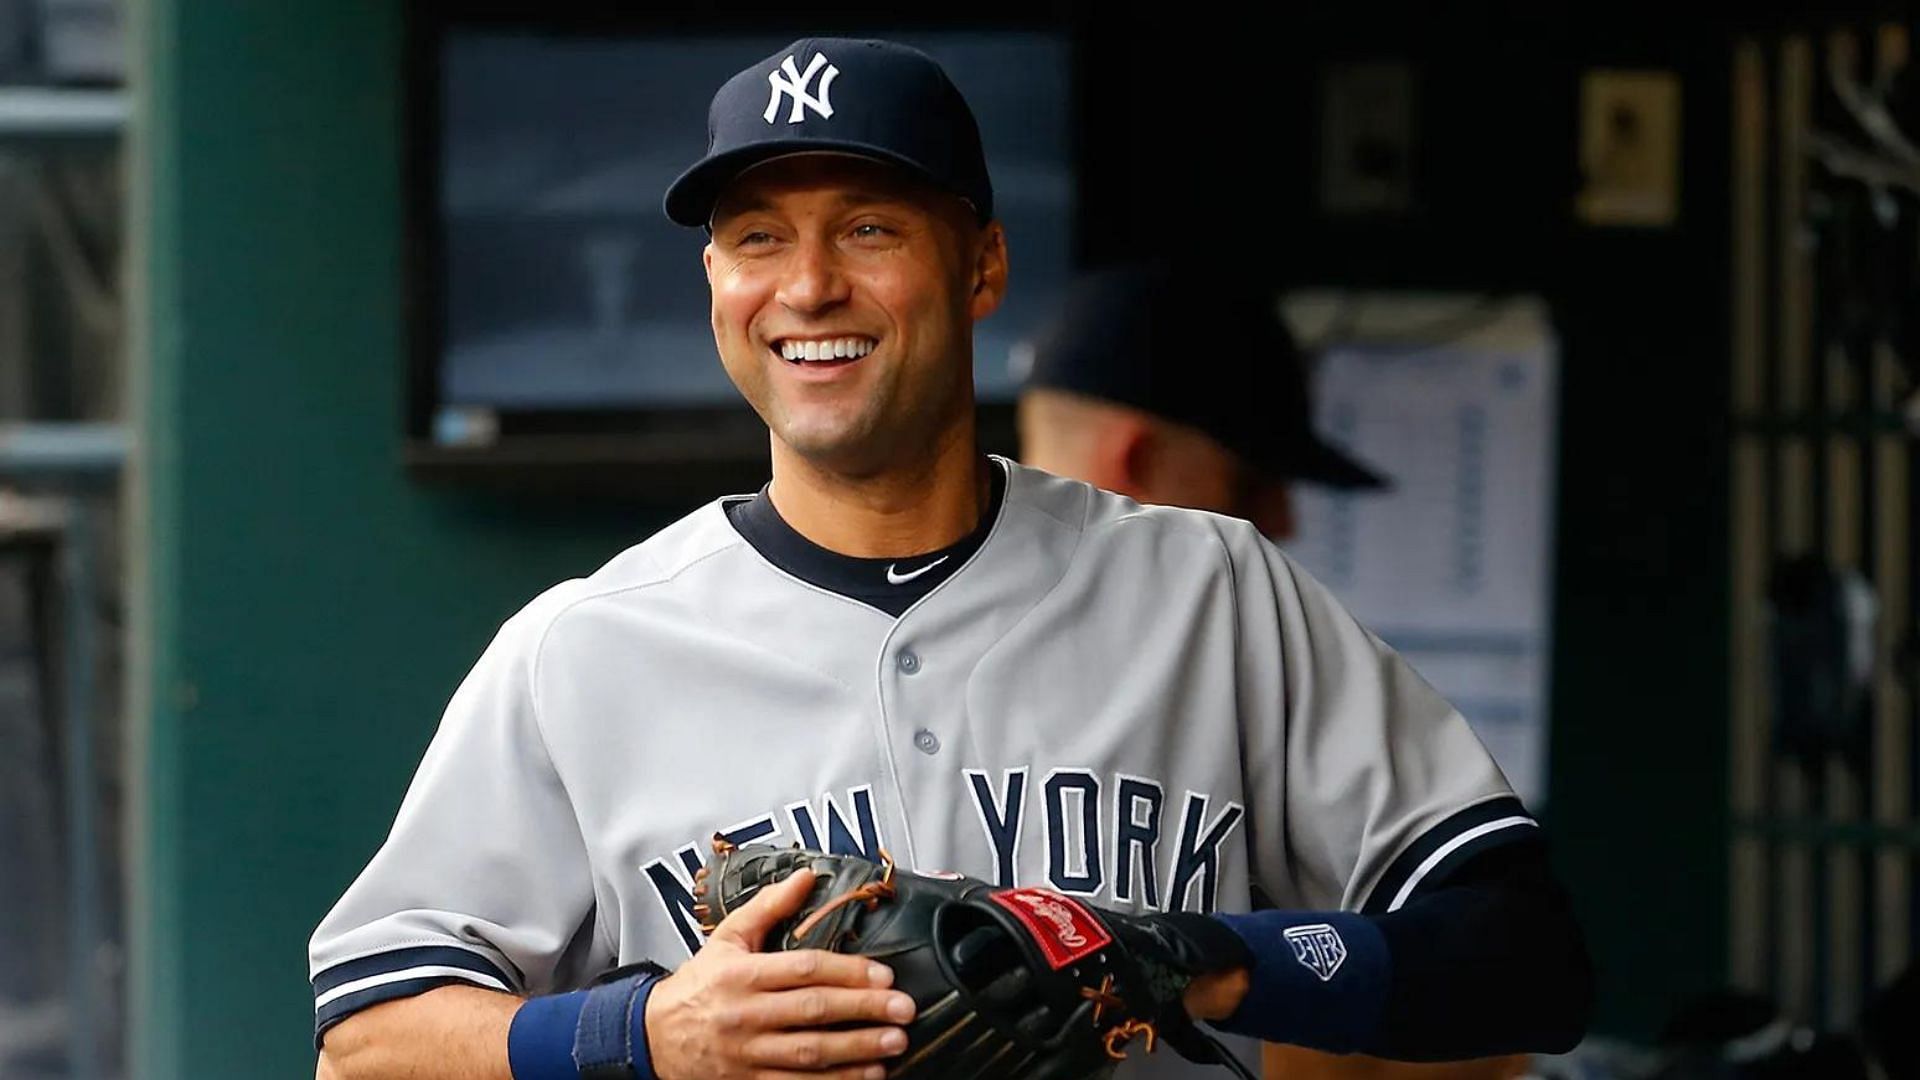 Yankees legend Derek Jeter once revealed how a meaningful gift freed him from ready-made meals